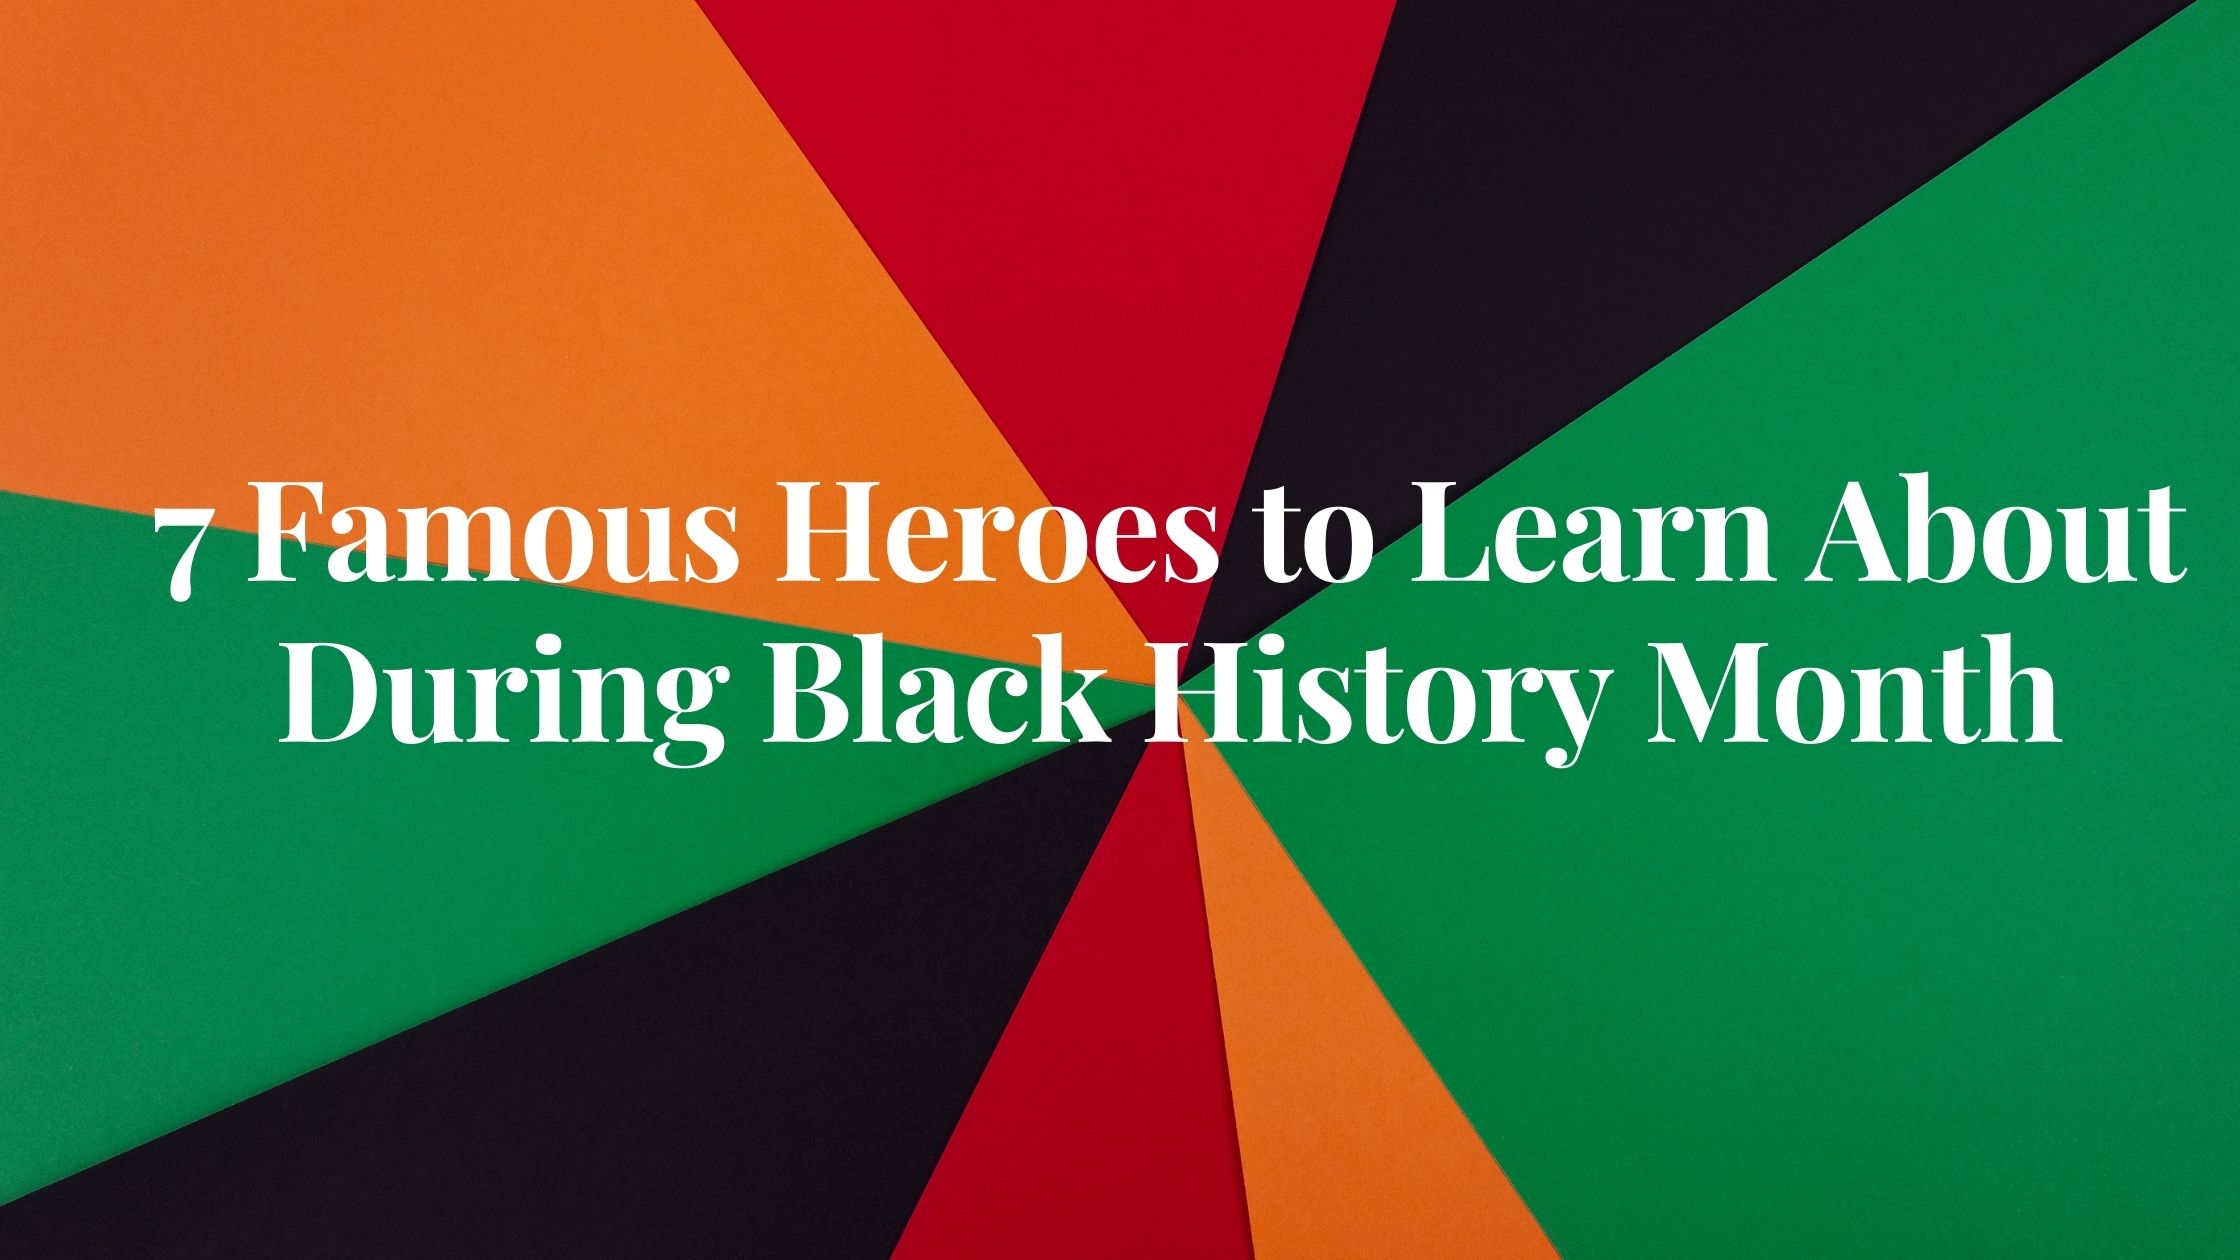 Image of 7 Famous Heroes to Learn About During Black History Month  